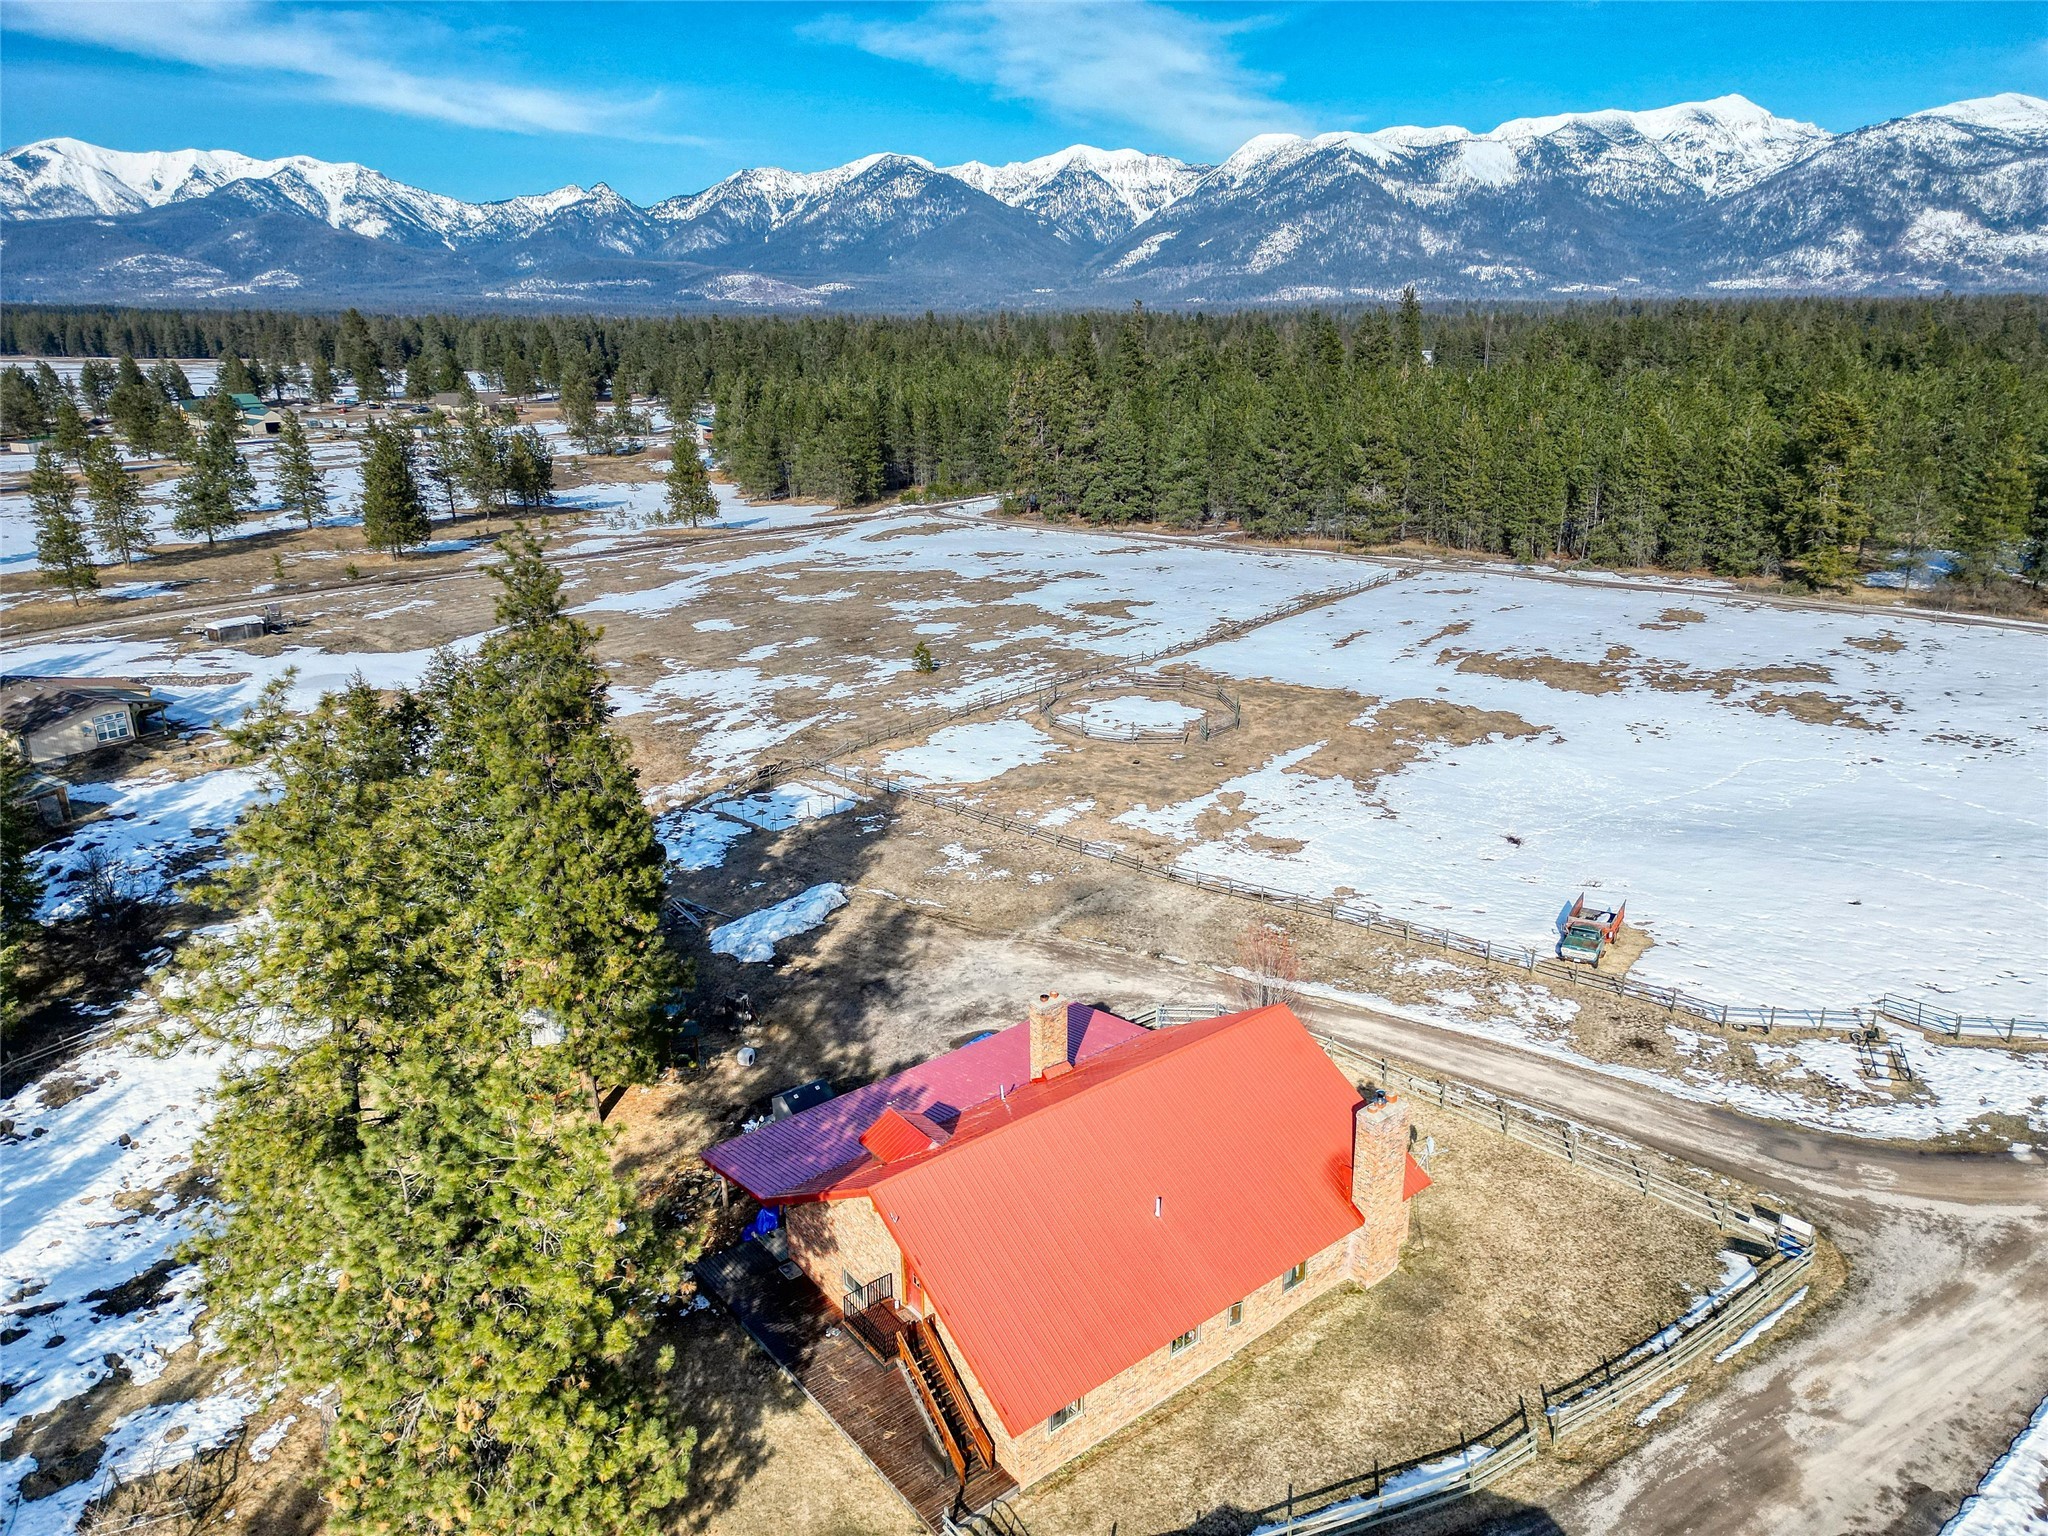 Amazing investment opportunity! Sitting on just over 10 acres, this beautiful oasis in the woods of Bigfork features 4 income-producing units. With stunning views of the mountains, the main home features just over 2,500 square feet, 4 bedrooms, 1 bathroom, a built-in wood fireplace, beautiful red oak floors, a loft, vaulted ceilings, one -level living, an open floor plan, large windows and a large, covered patio. Just above the main house, there is a studio apartment with 1 bathroom that features beautiful red oak flooring and amazing storage. 
Additional features of the property include: TWO 1 bedroom/1 bathroom apartments, an attached, large shop with 2 garage doors, and much more. Don’t miss out on your opportunity! Book your showing today! Call Laurie Turner 406-253-4448 or Stephanie Thompson 406-871-8805, or your real estate professional.